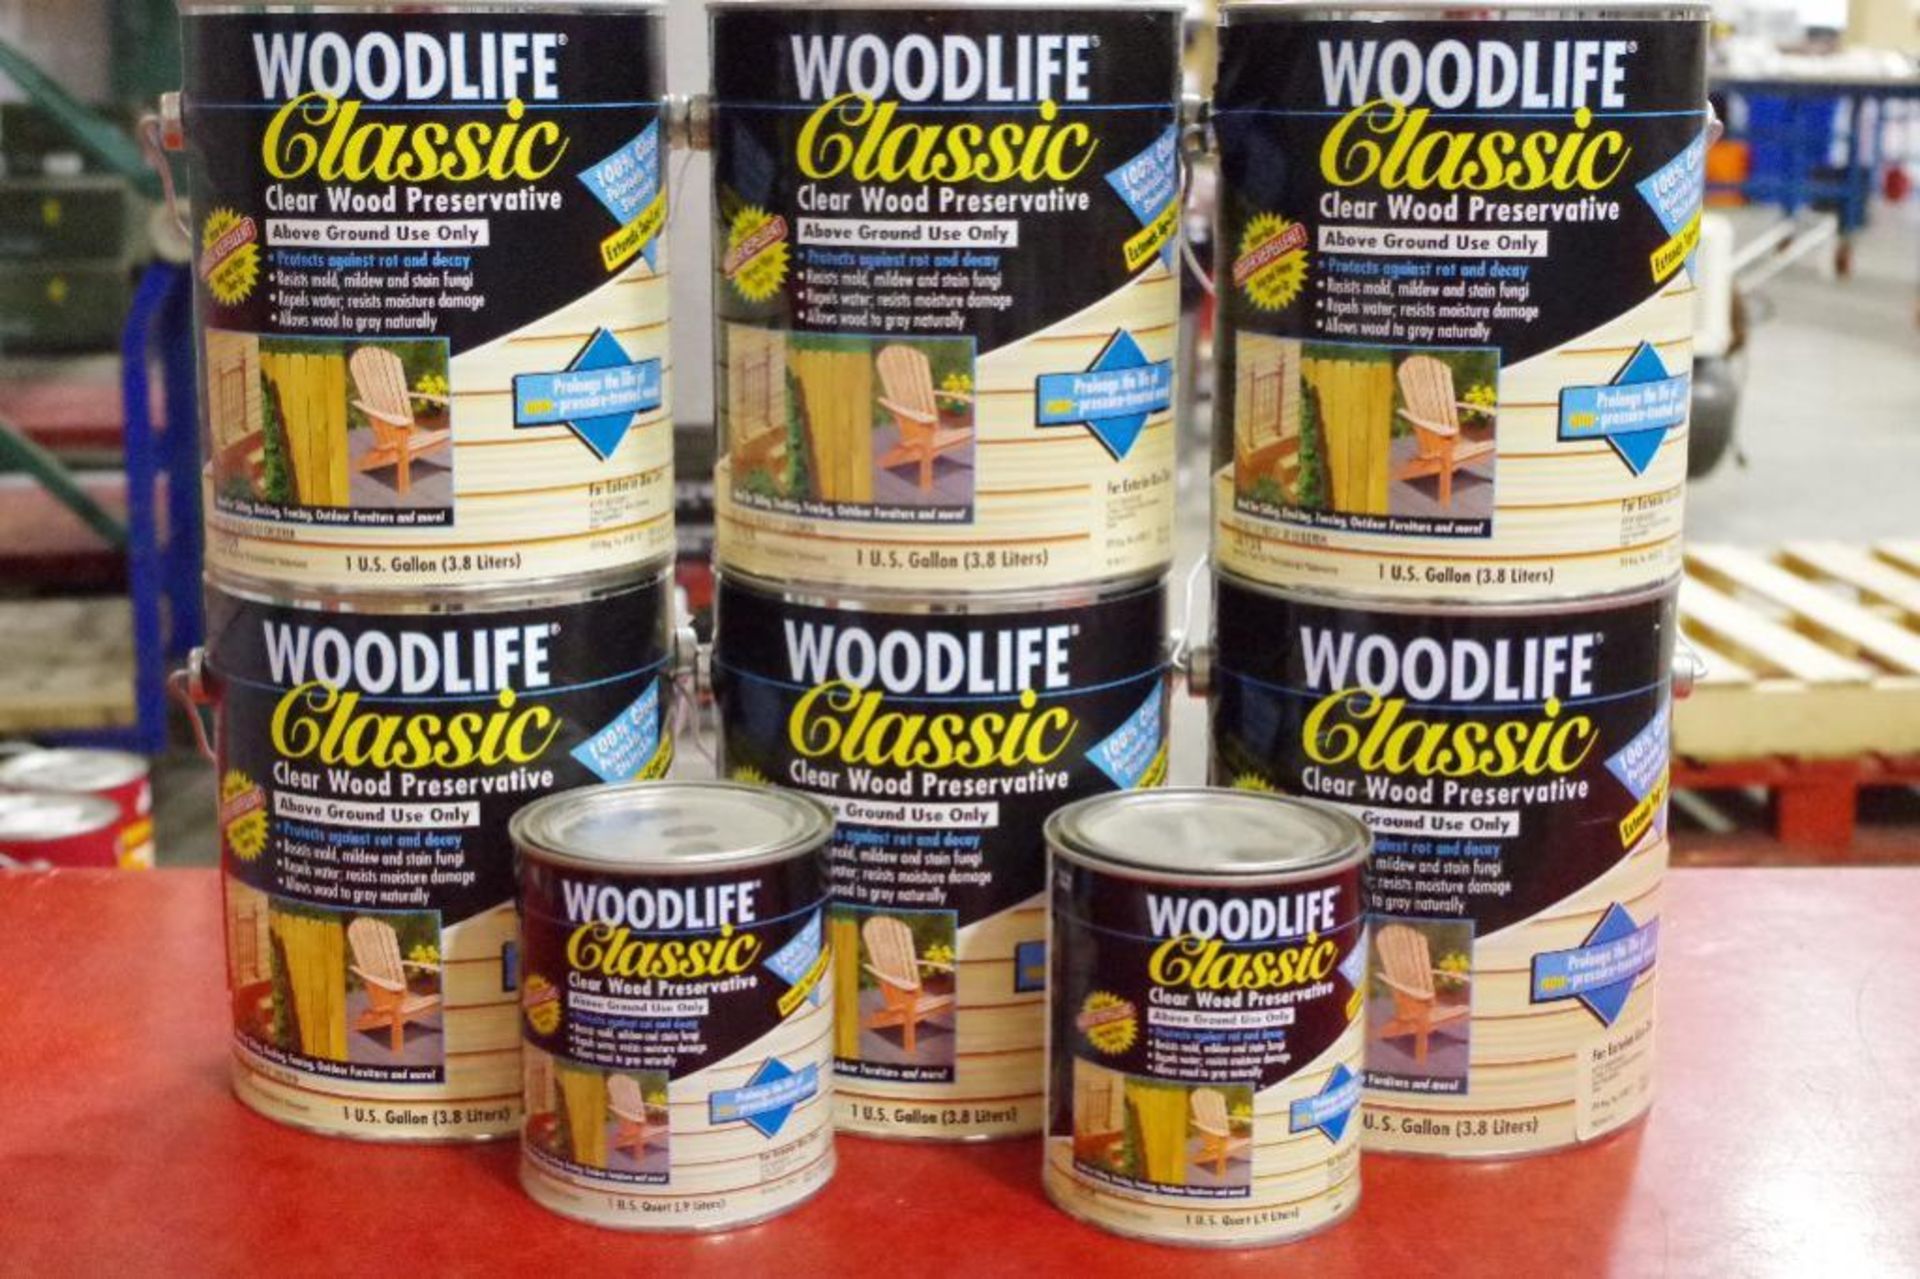 (8) Cans WOODLIFE CLASSIC Clear Wood Preservation (Six 1-Gallon Cans, Two 1-Quart Cans)